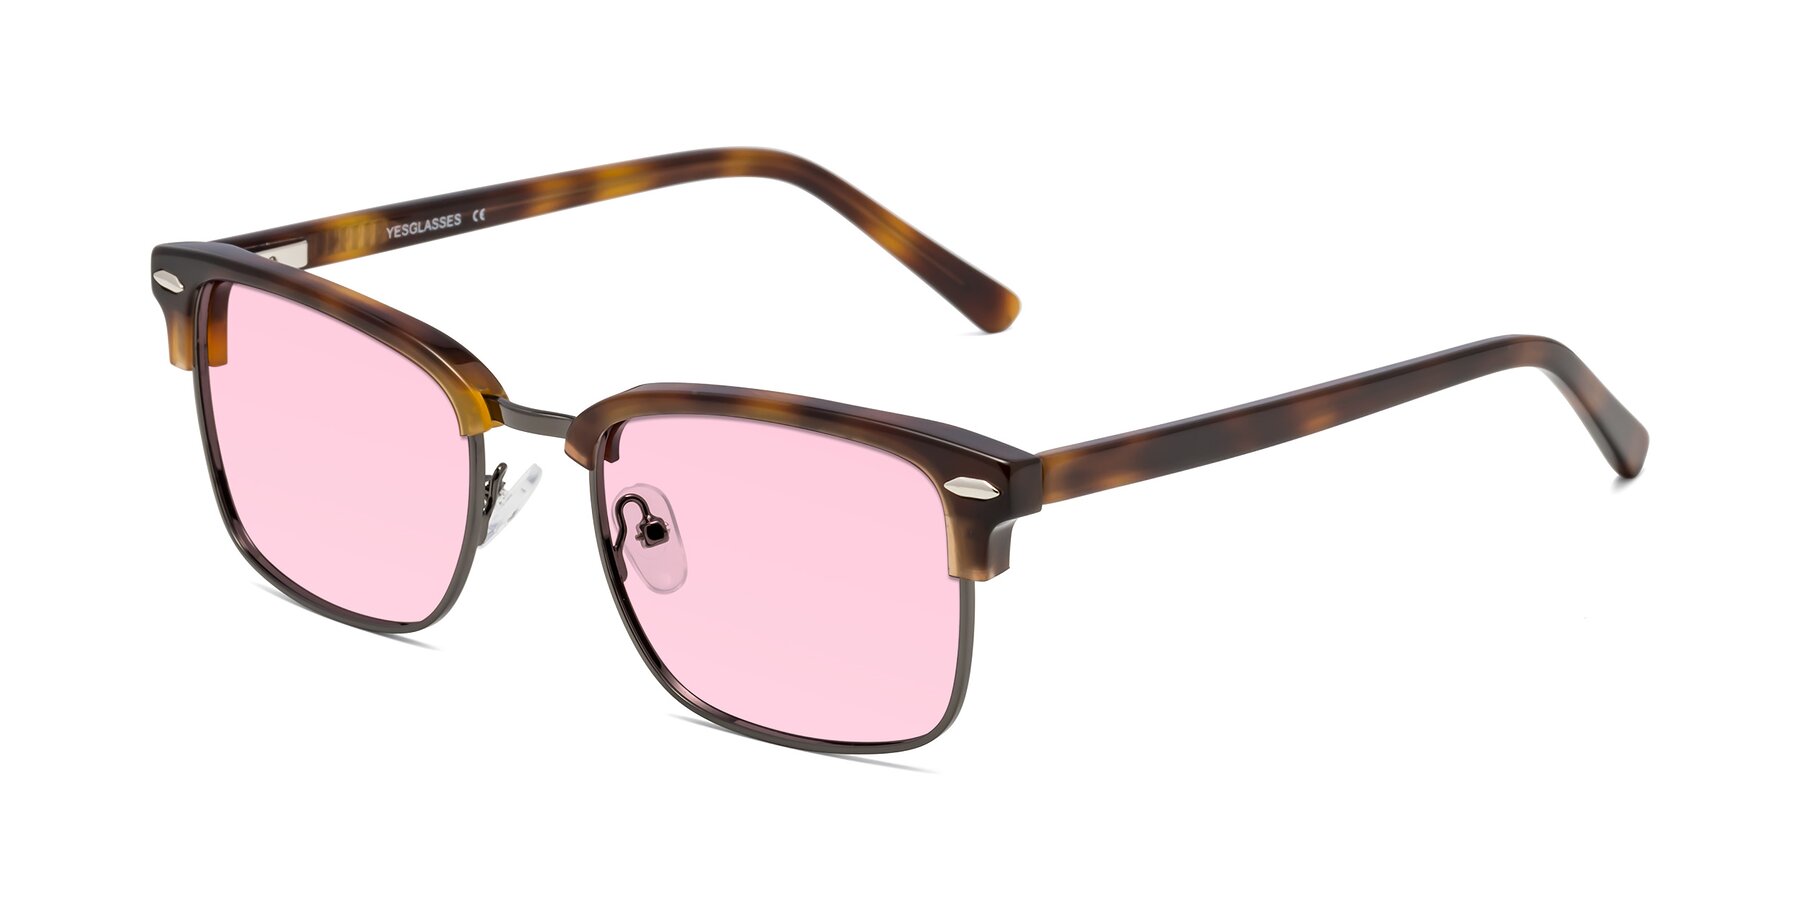 Angle of 17464 in Tortoise/ Gunmetal with Light Pink Tinted Lenses